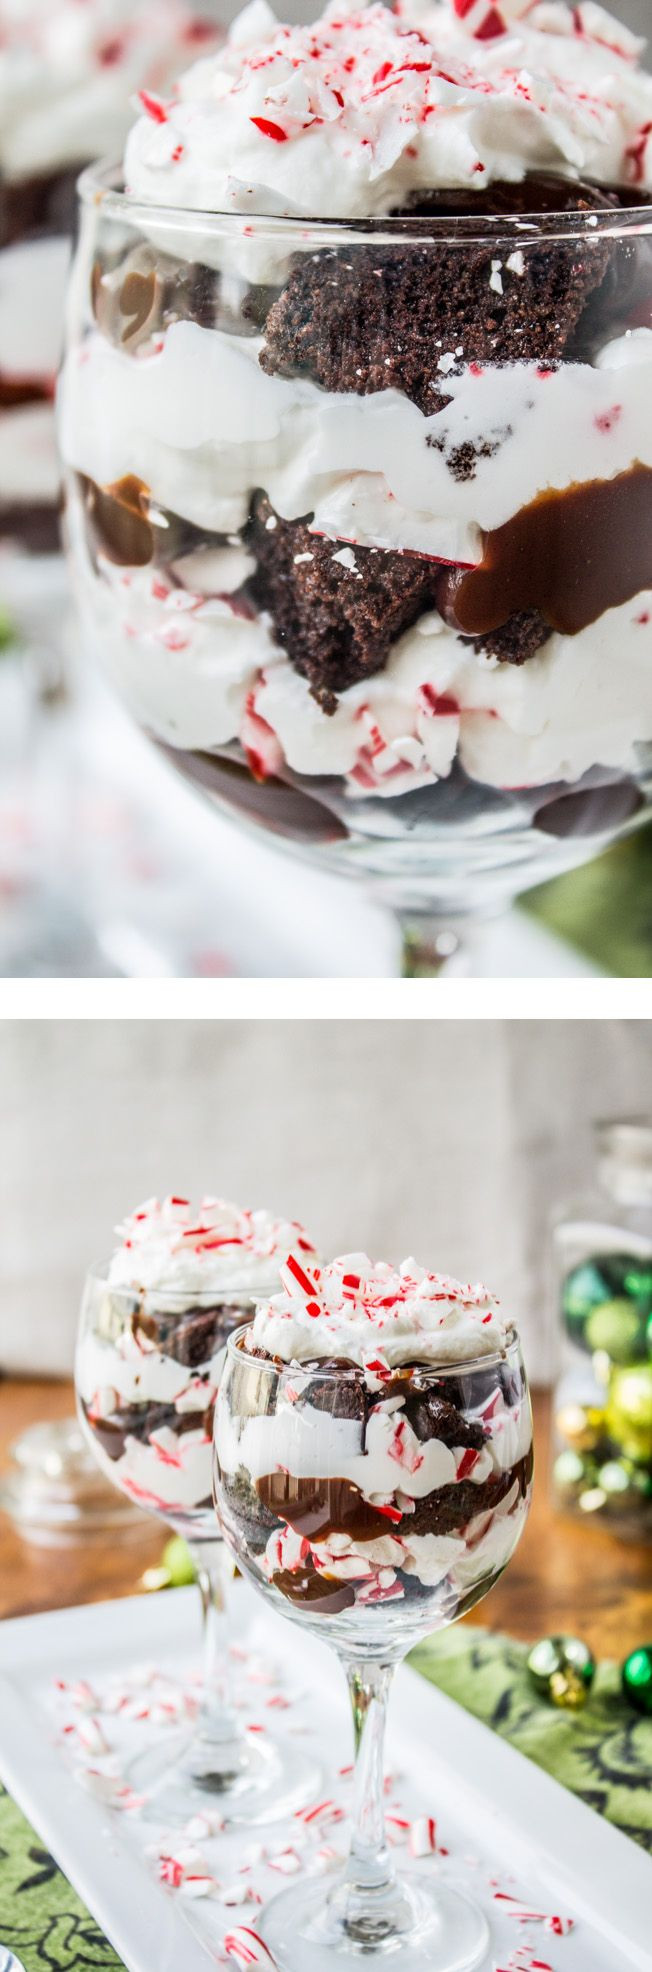 Christmas Day Desserts
 16 Awesome Christmas Day Dessert Recipes